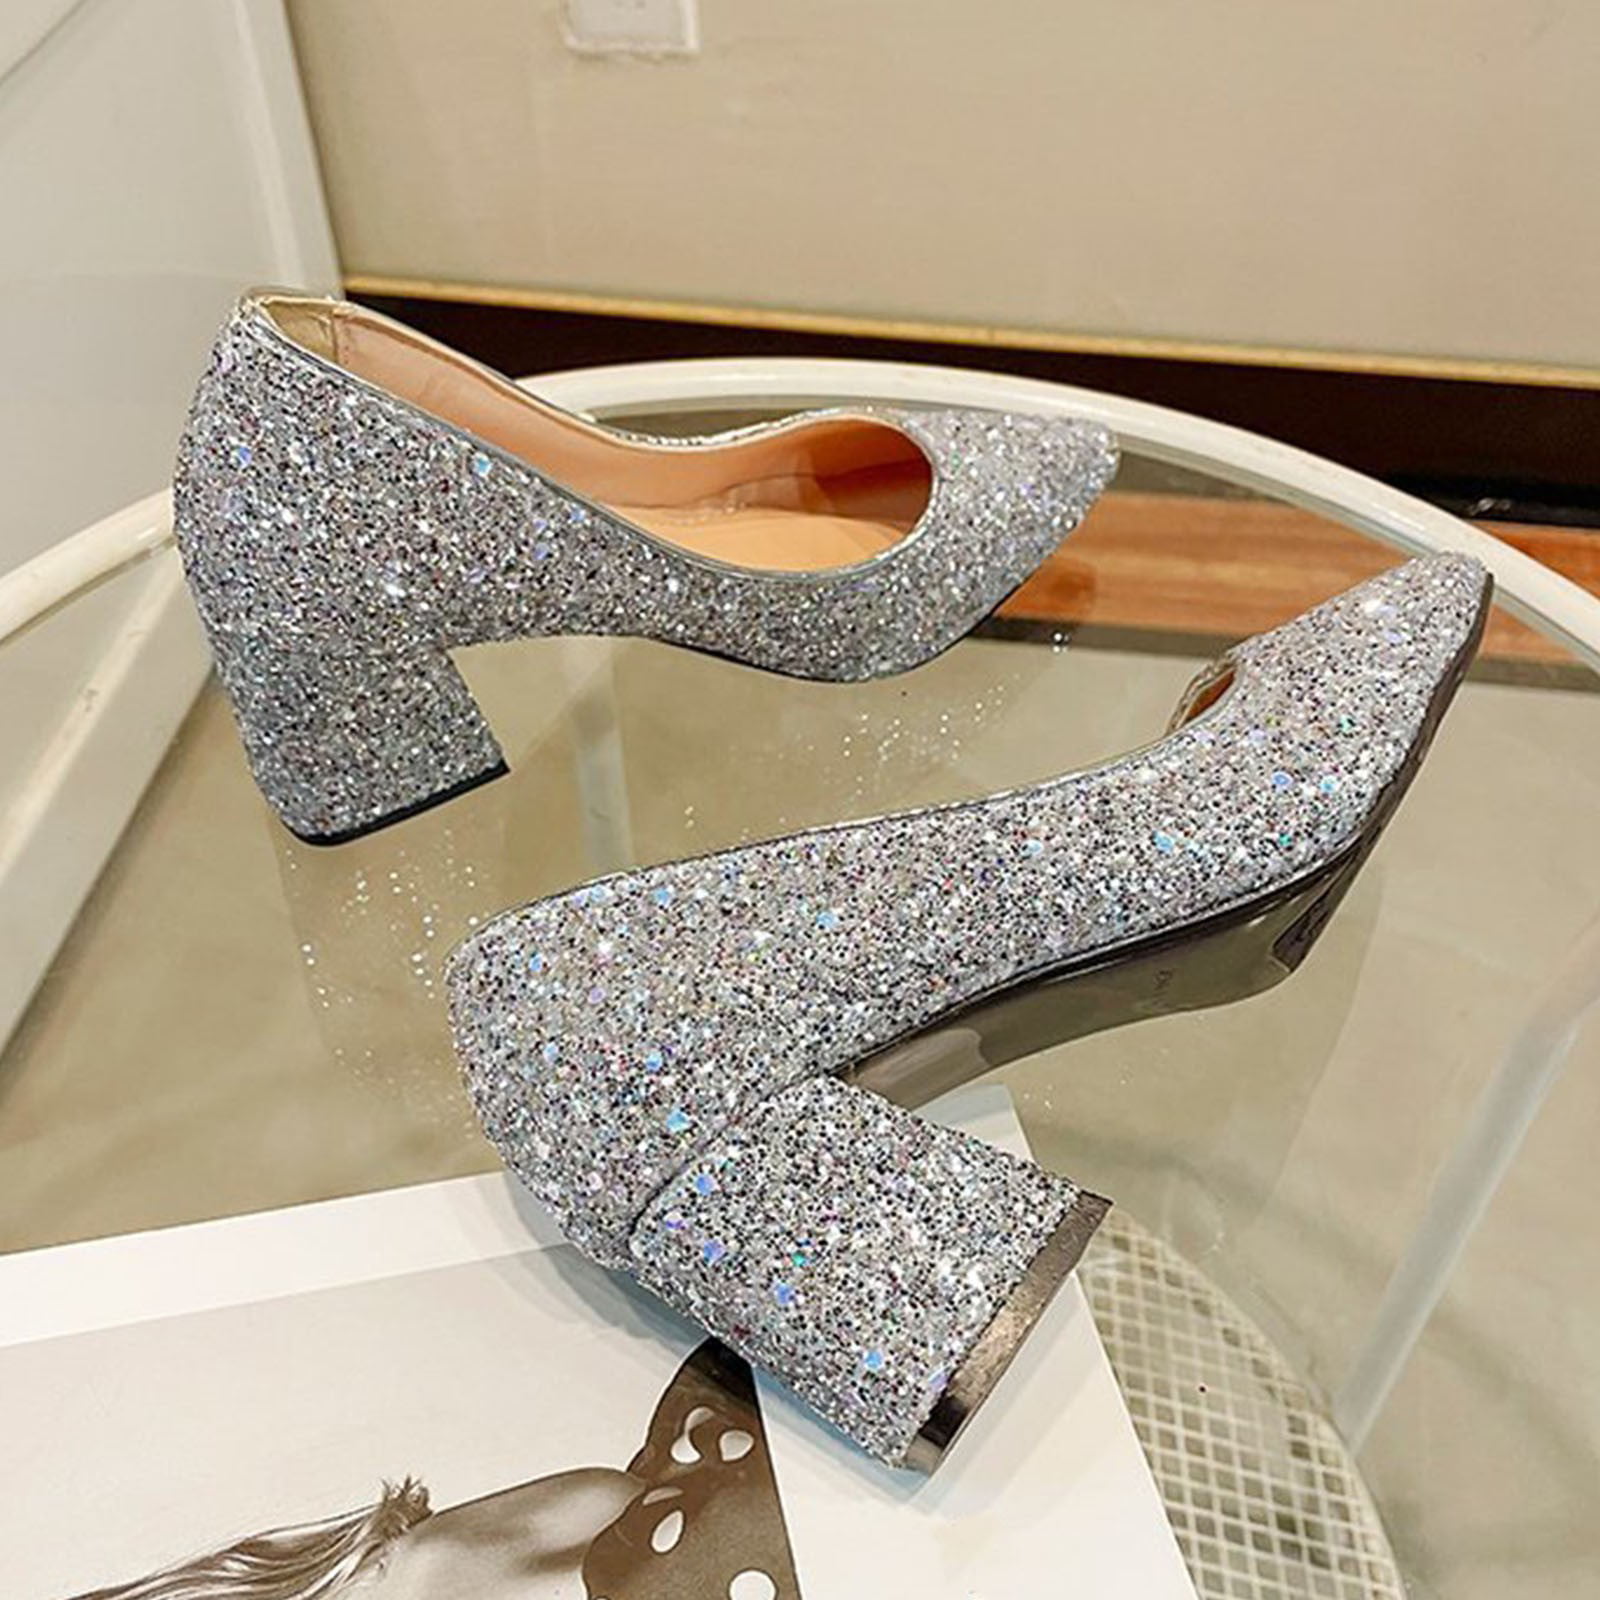 Stylish Womens 16cm Heels With Metal Decoration And Pointed Fine Heel  Available In Big Sizes 11 19 From Qiaopi, $35.61 | DHgate.Com